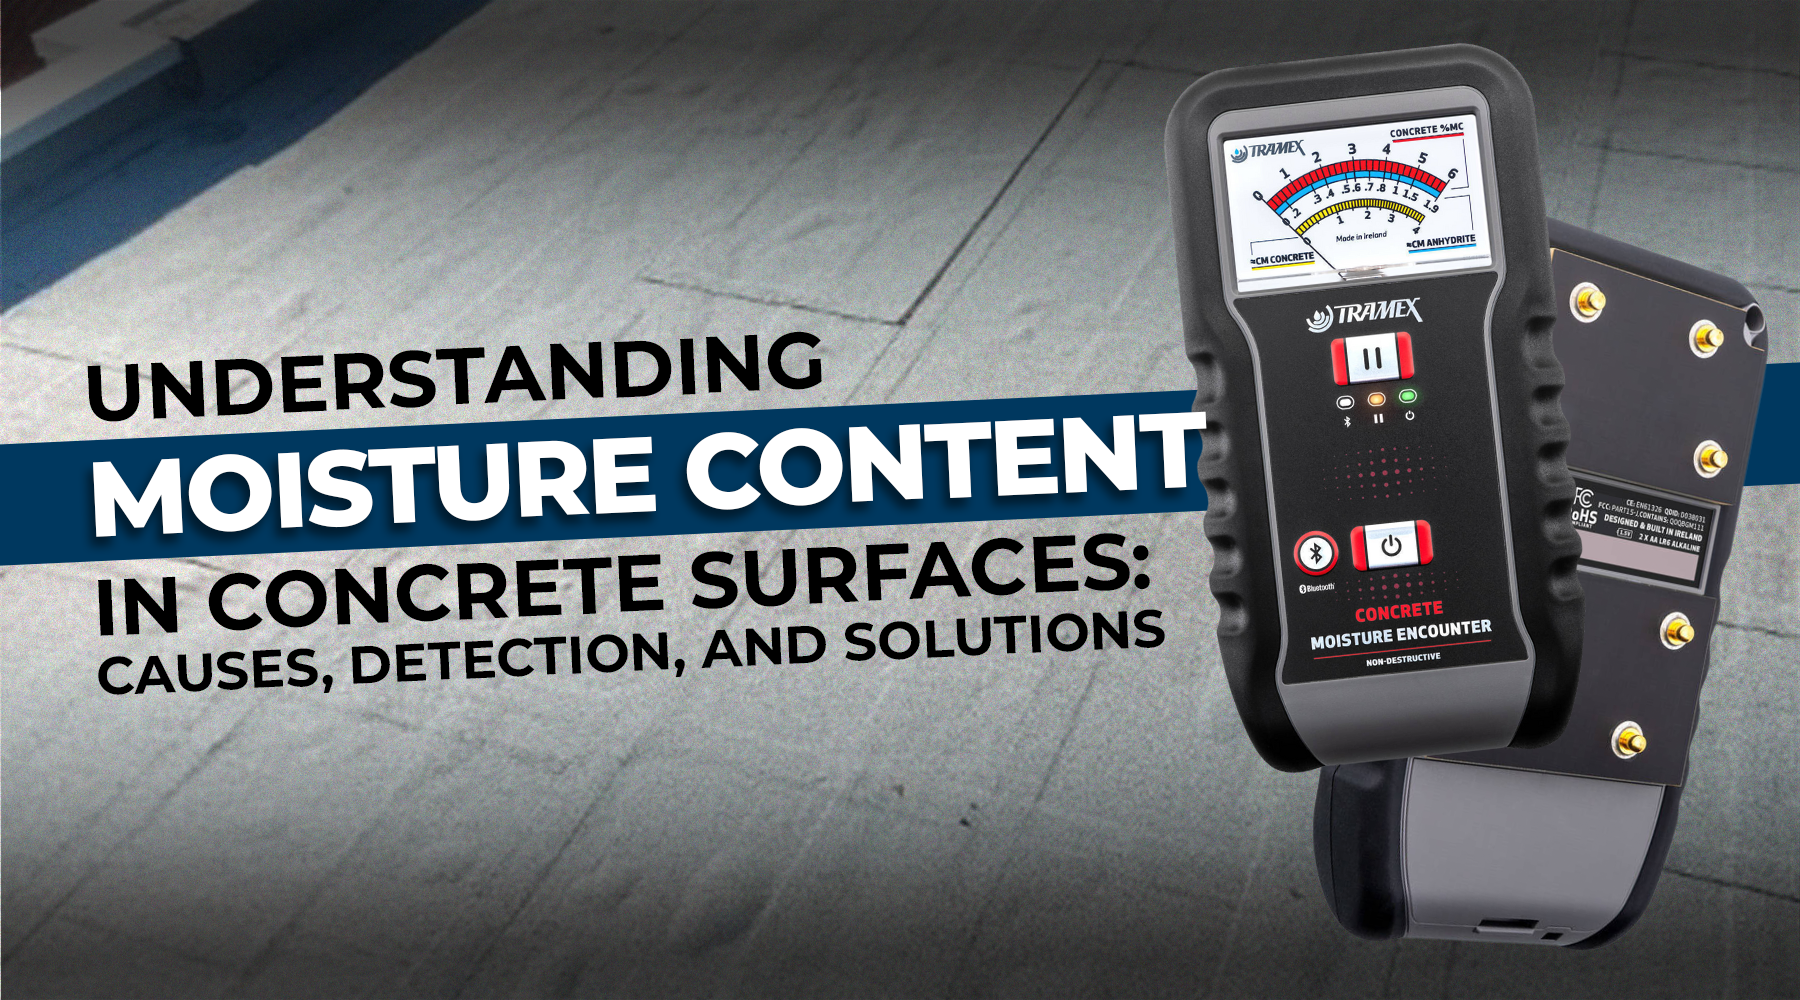 Understanding Moisture Content in Concrete Surfaces: Causes, Detection, and Solutions